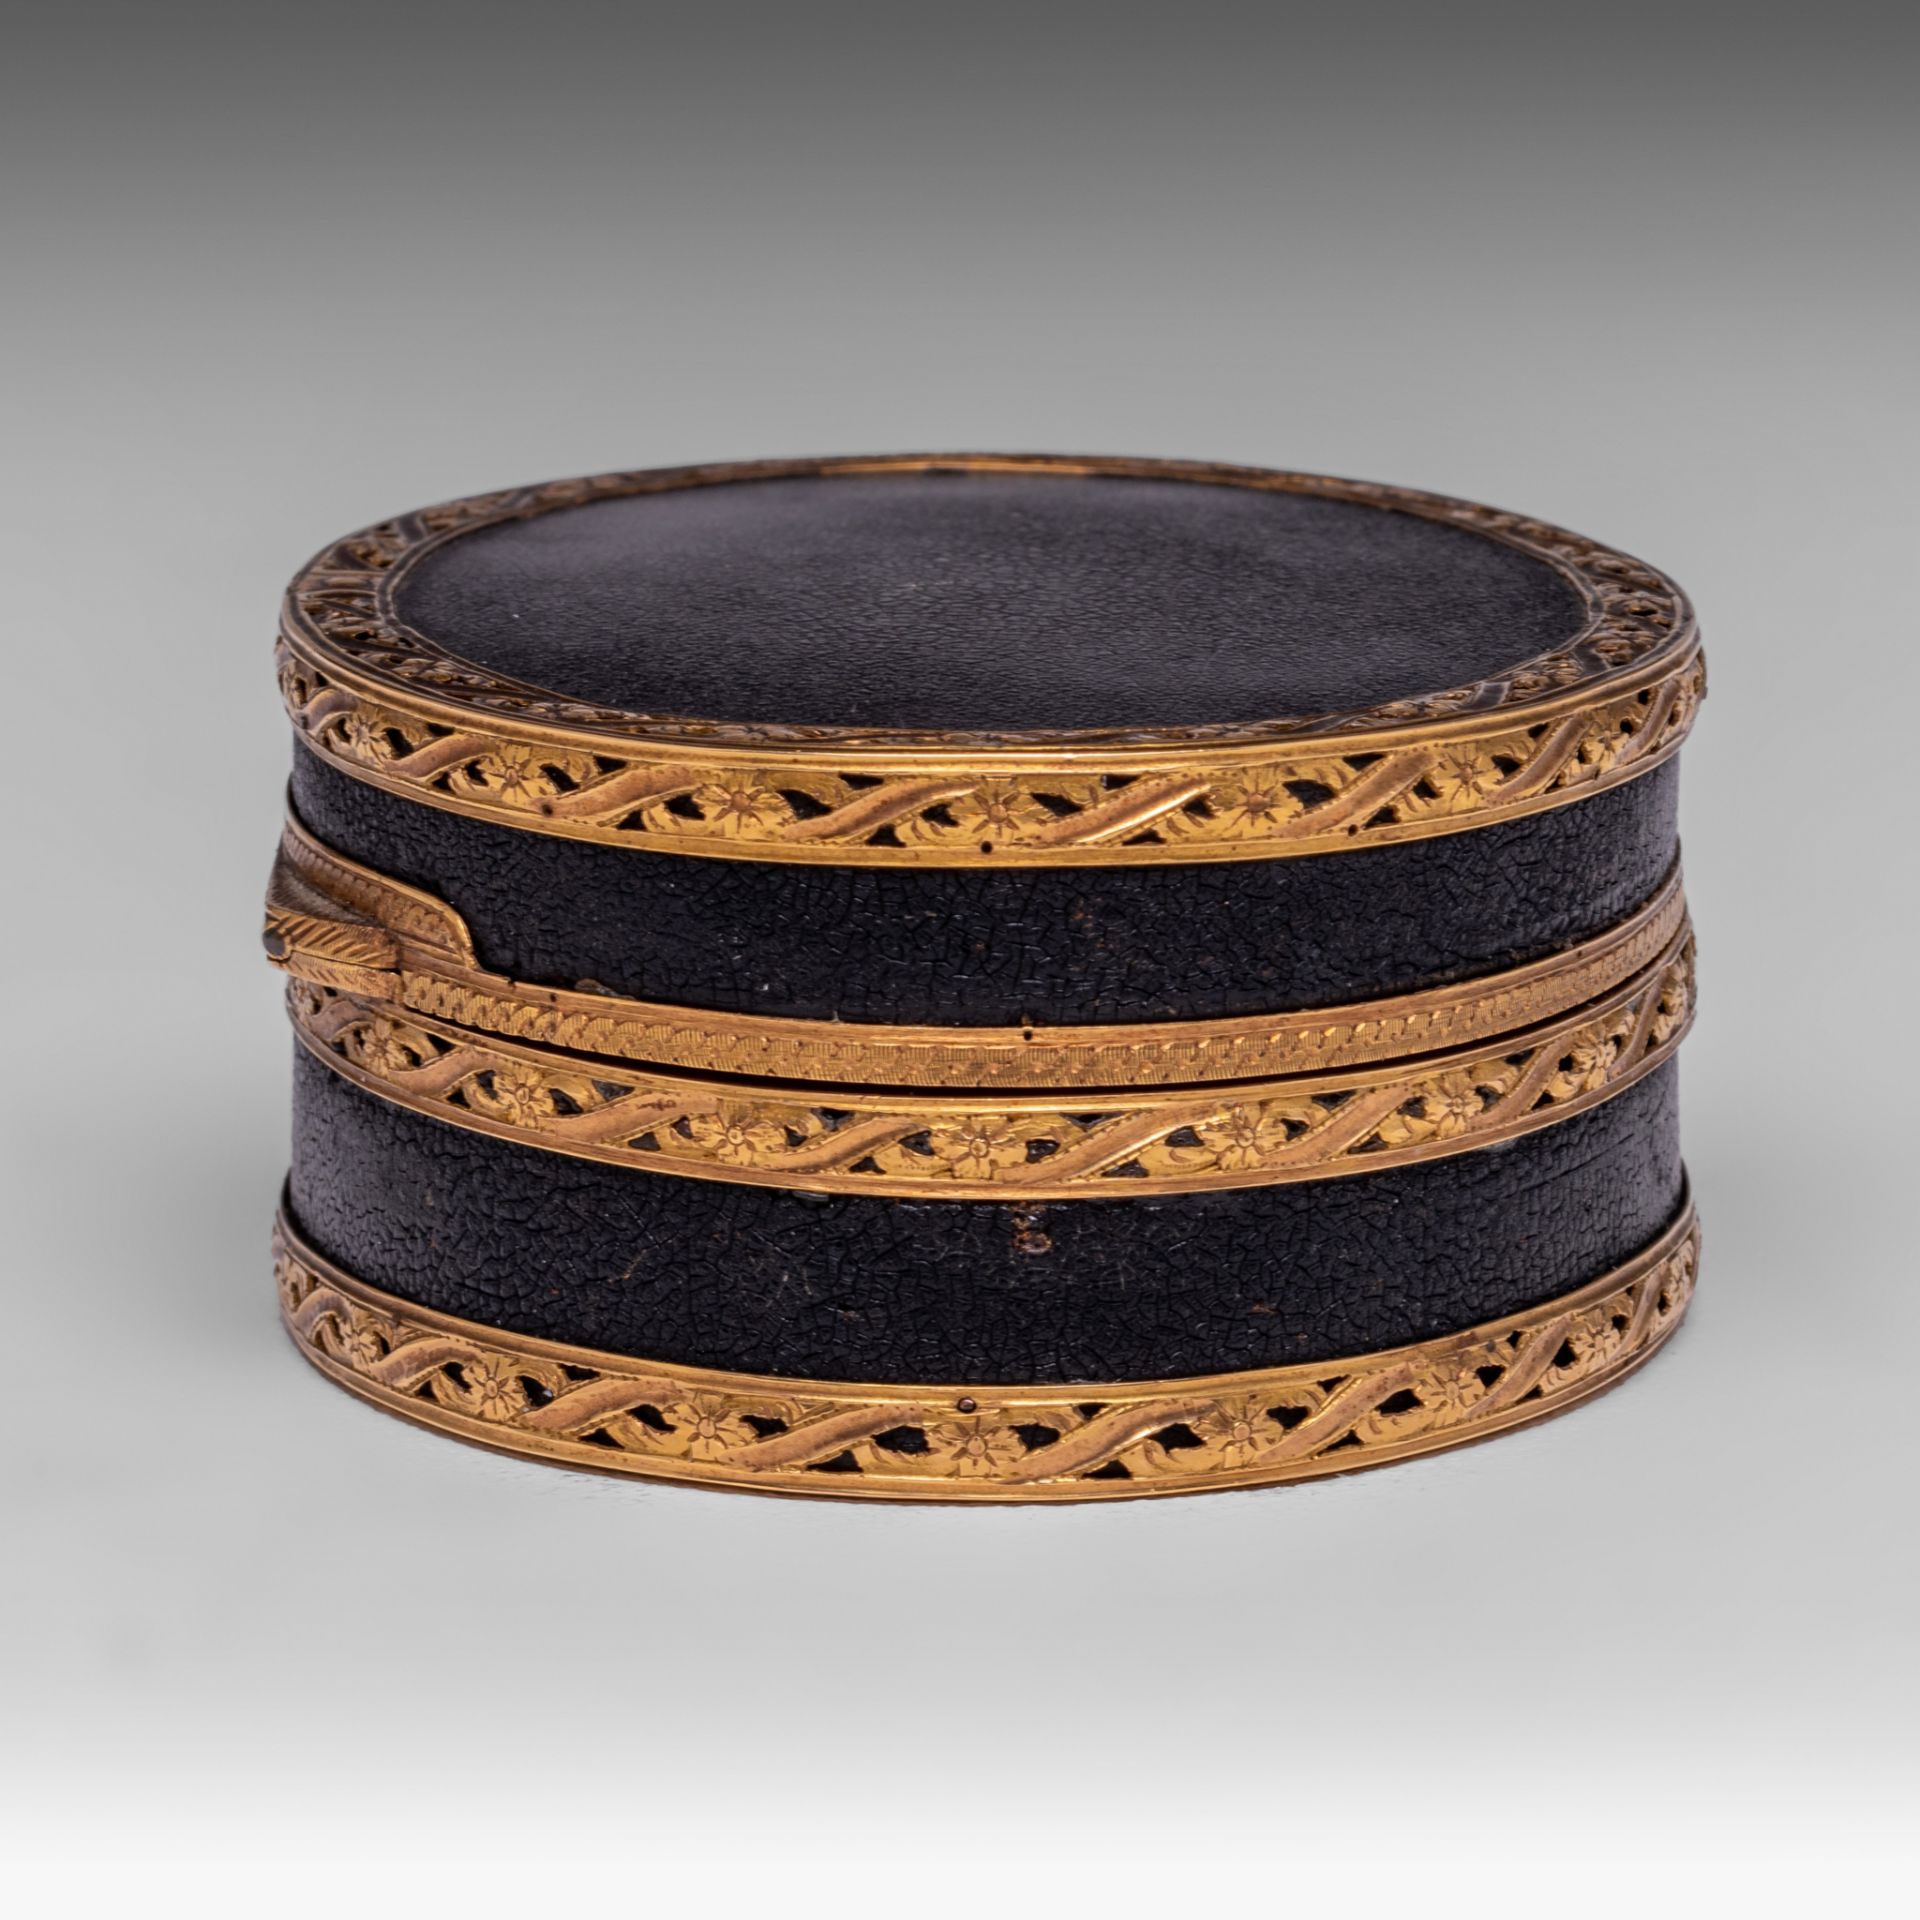 A fine Louis XVI leather and gold snuffbox, the inside with tortoiseshell, late 18thC, H 3,5 cm - Image 6 of 7